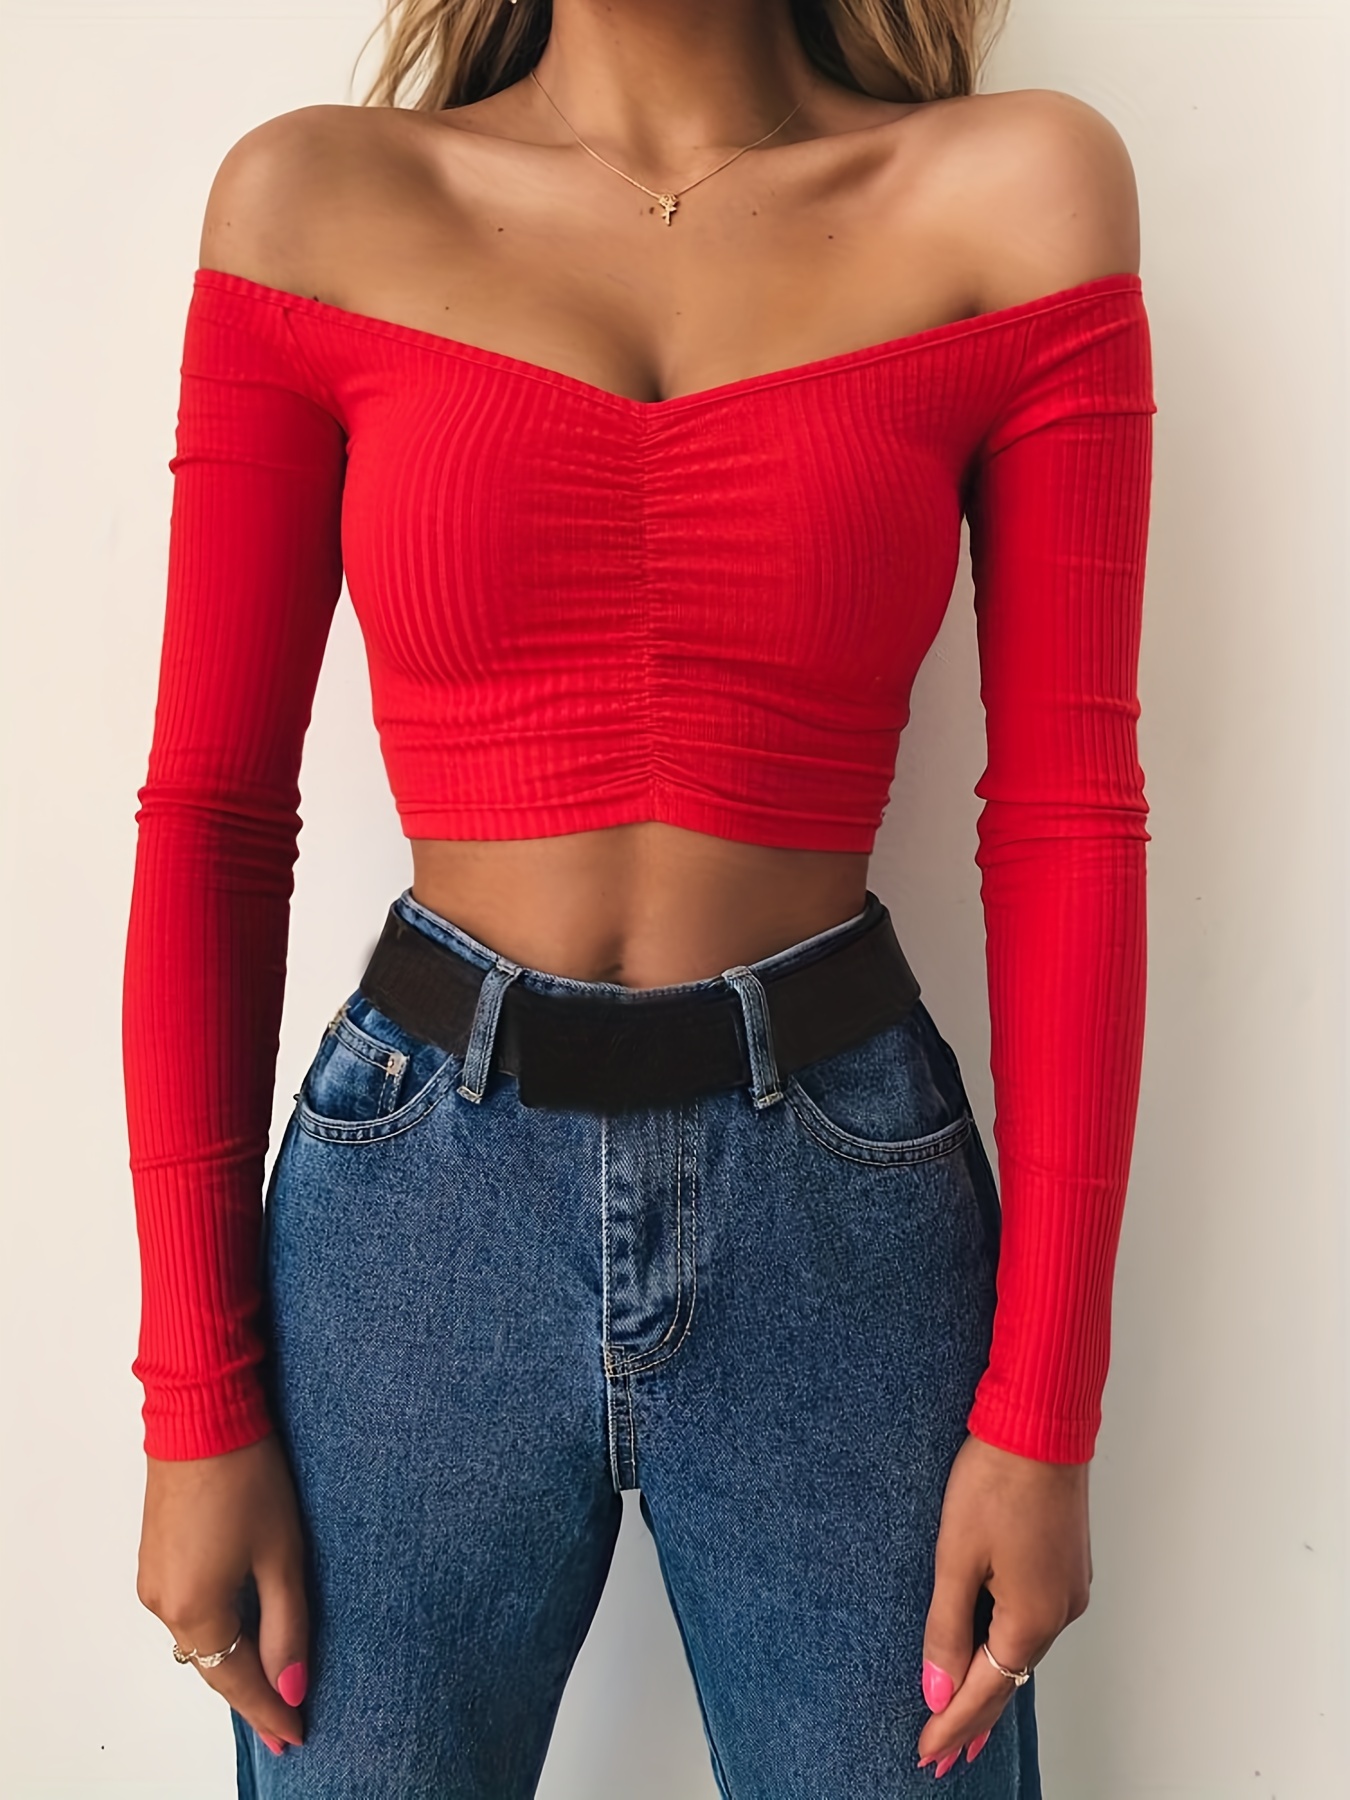 Women's Long-Sleeved One-Shoulder Short Tops Elegant and Sexy – Fitiny